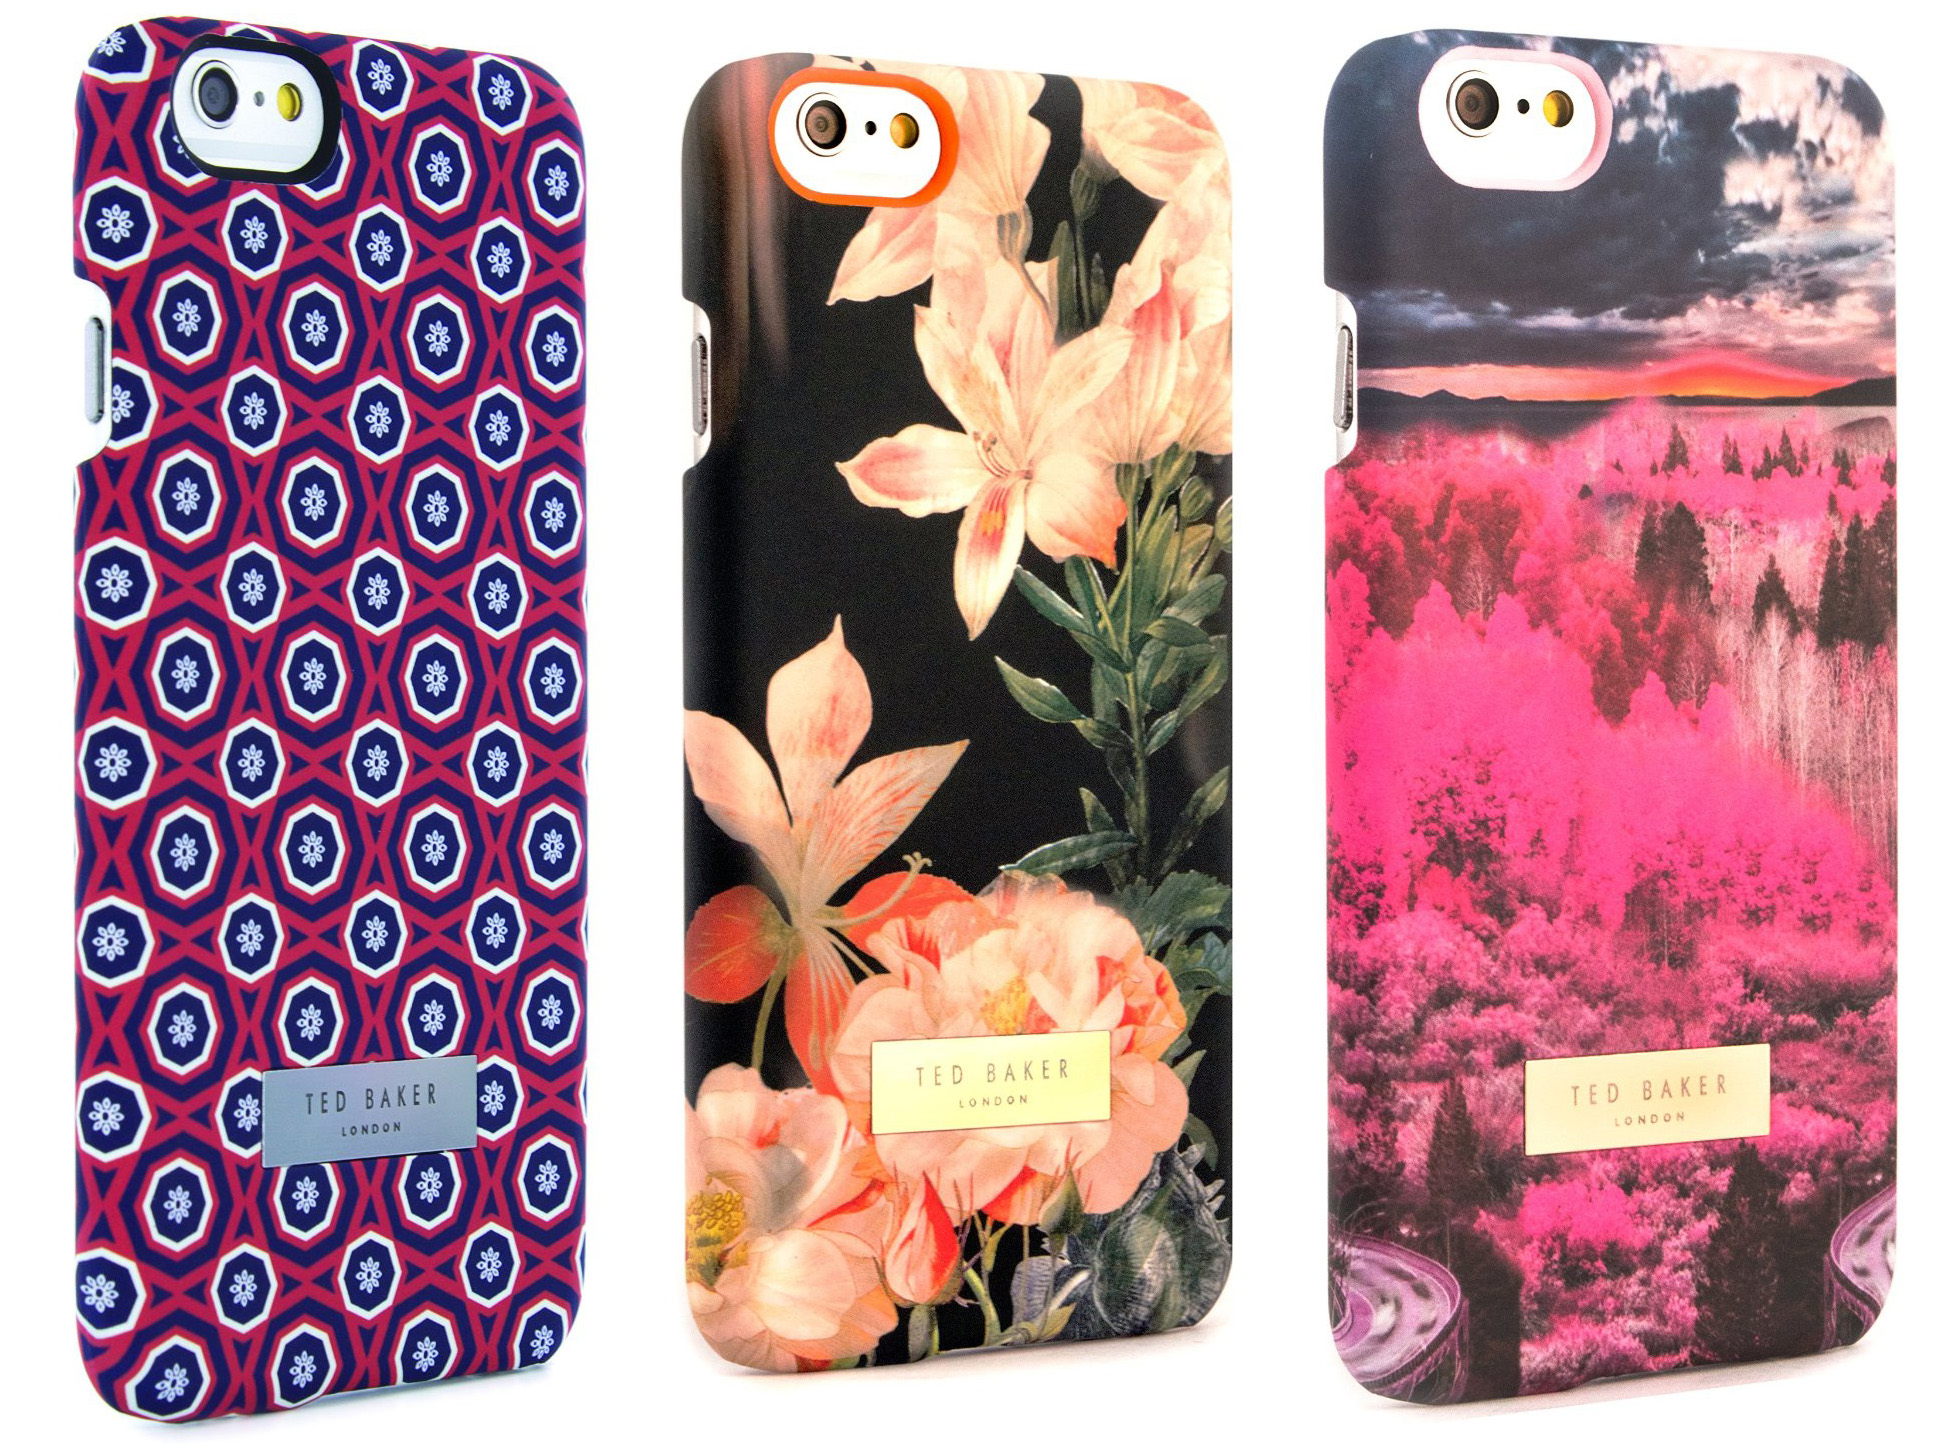 ted baker iphone 6 cases